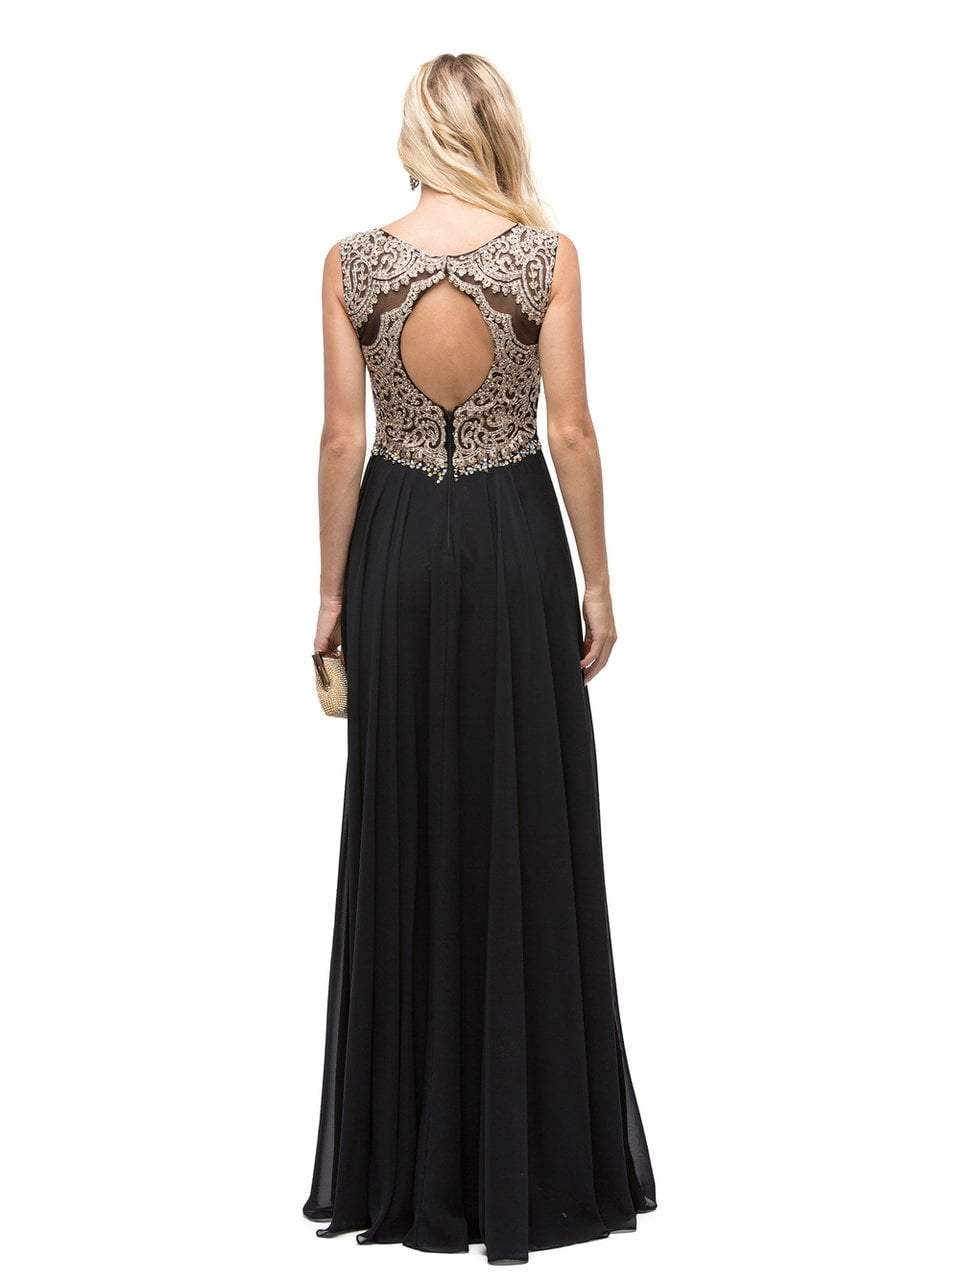 Image of Dancing Queen Bridal - 9826 Gilded Lace Illusion A-Line Prom Dress